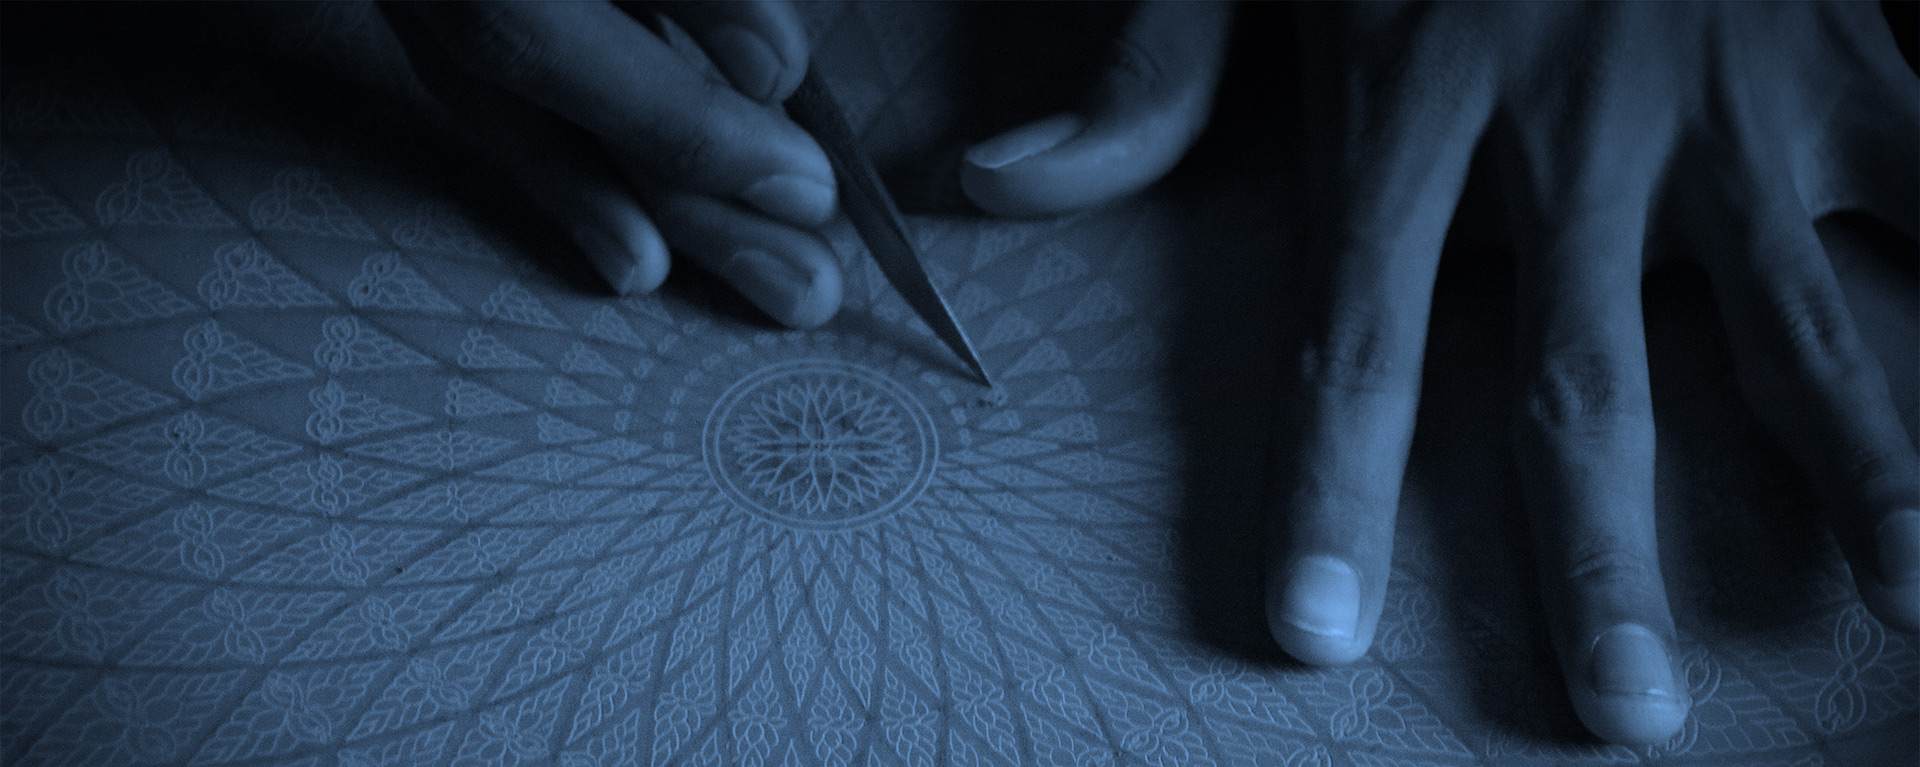 Photo of hands carving a pattern